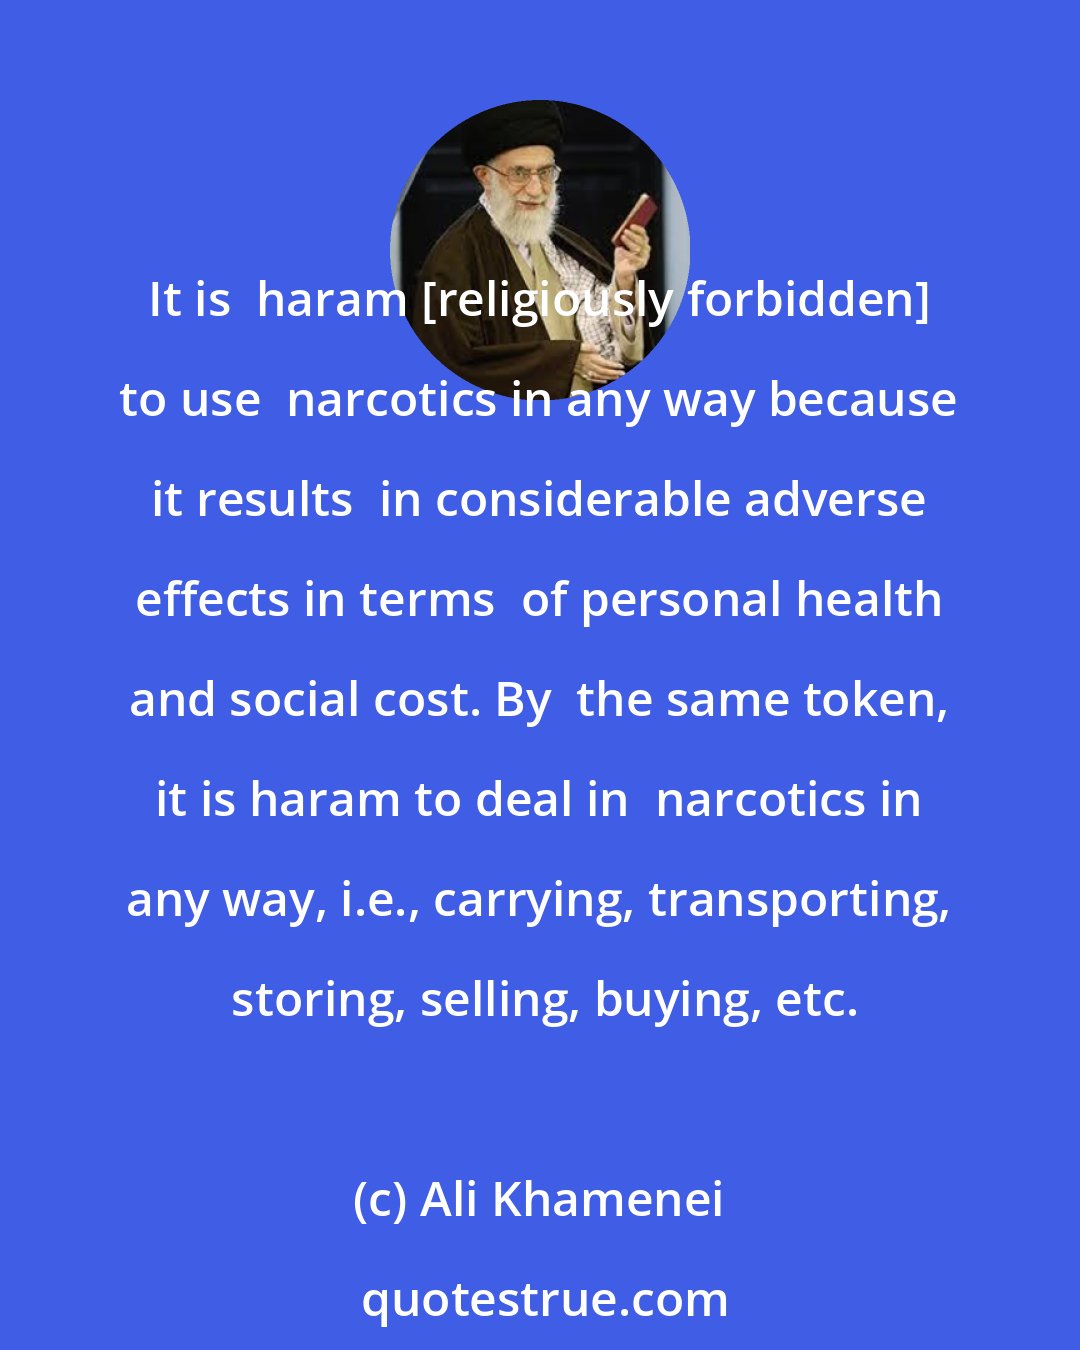 Ali Khamenei: It is  haram [religiously forbidden] to use  narcotics in any way because it results  in considerable adverse effects in terms  of personal health and social cost. By  the same token, it is haram to deal in  narcotics in any way, i.e., carrying, transporting,  storing, selling, buying, etc.